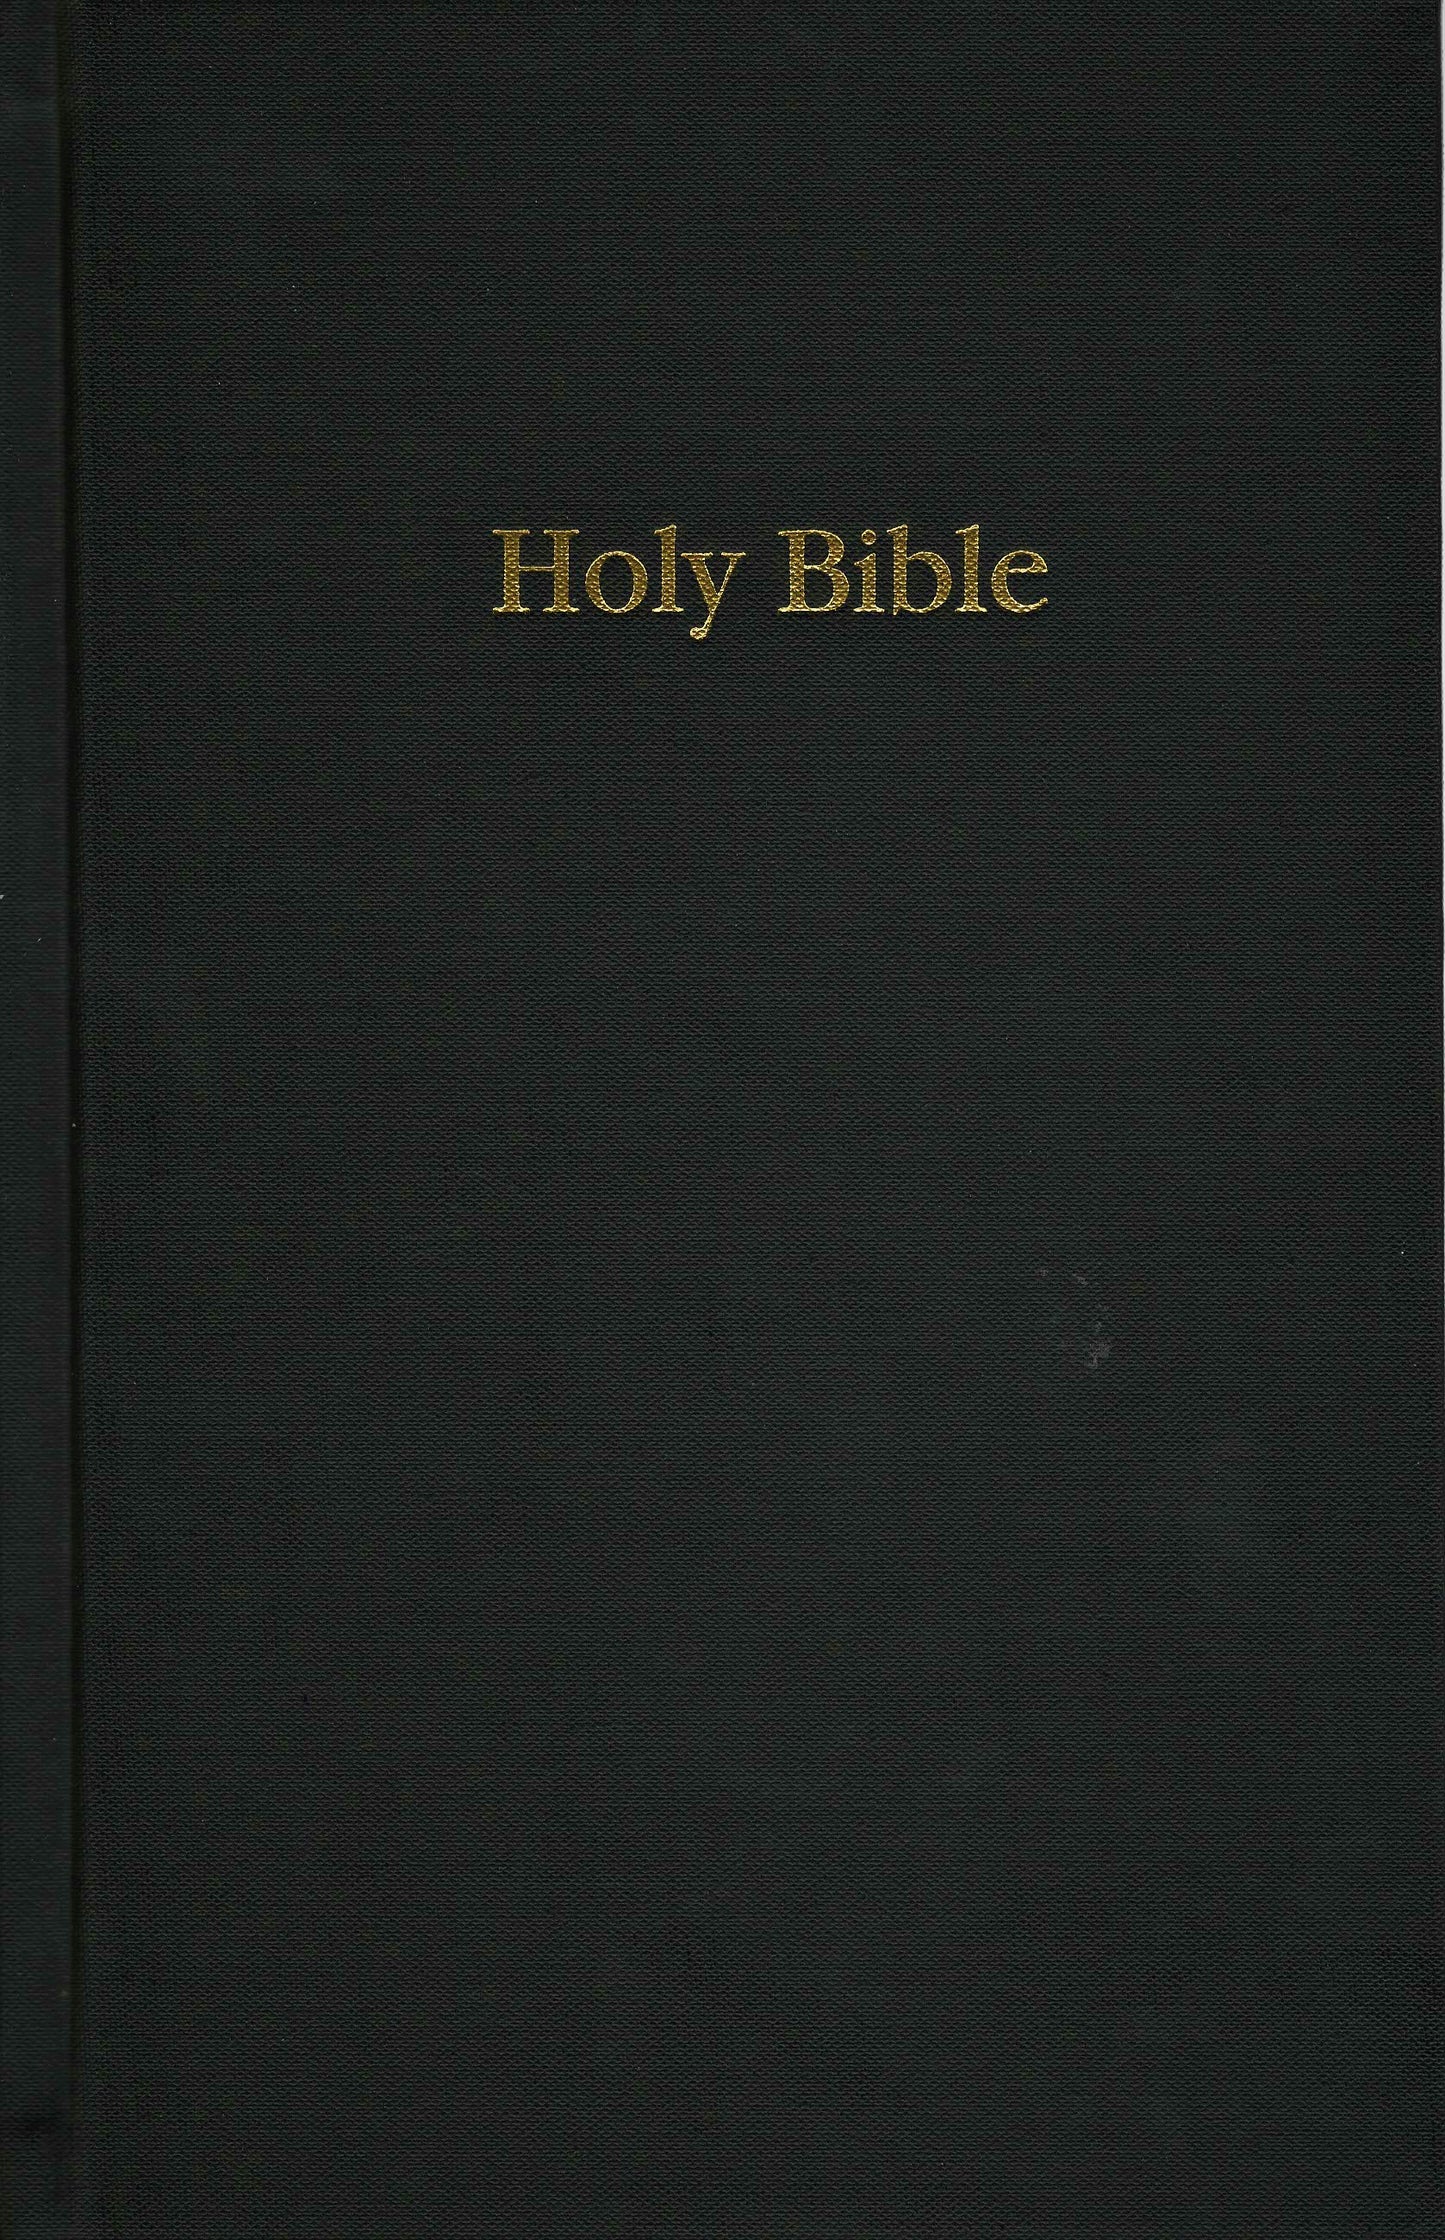 Foundation Publications Inc. NASB Pew Edition Large Print Bible - Hardcover